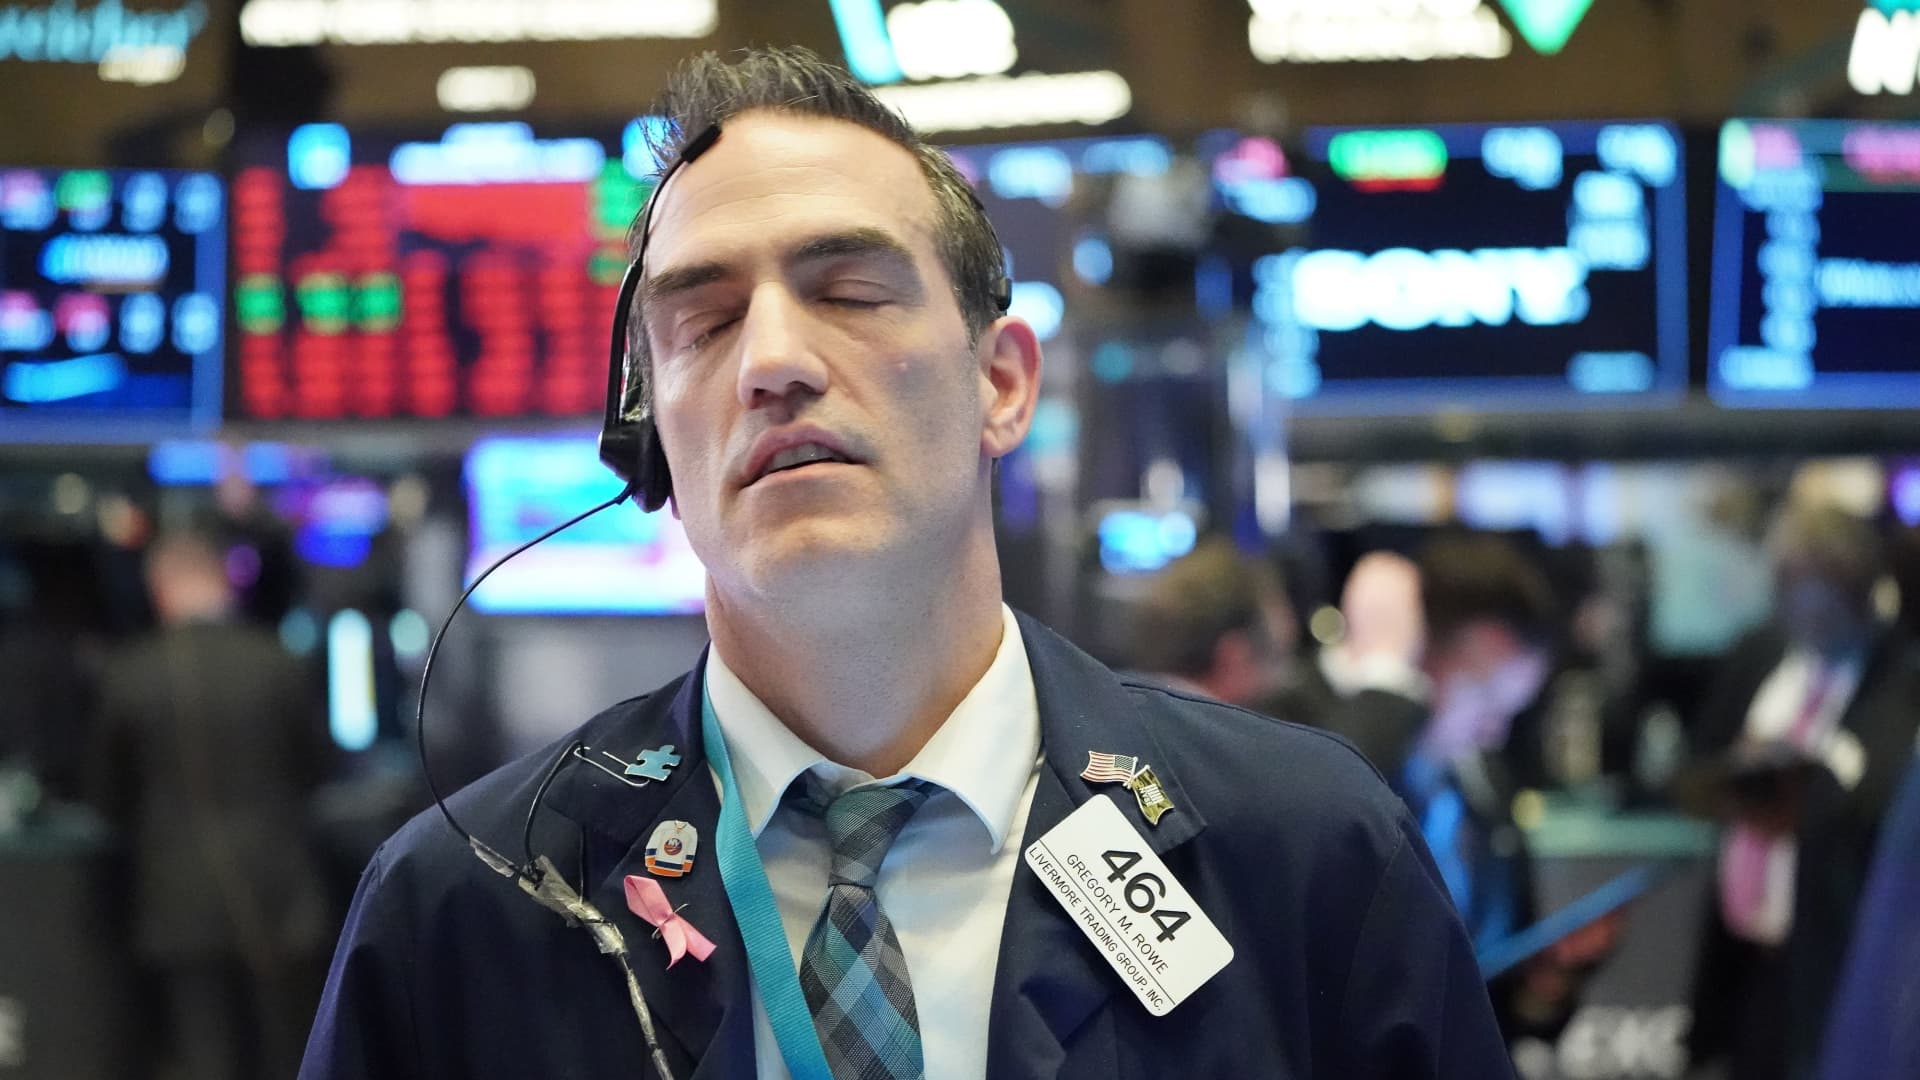 Dow tumbles more than 500 points, on pace for worst sell-off since March: Live updates